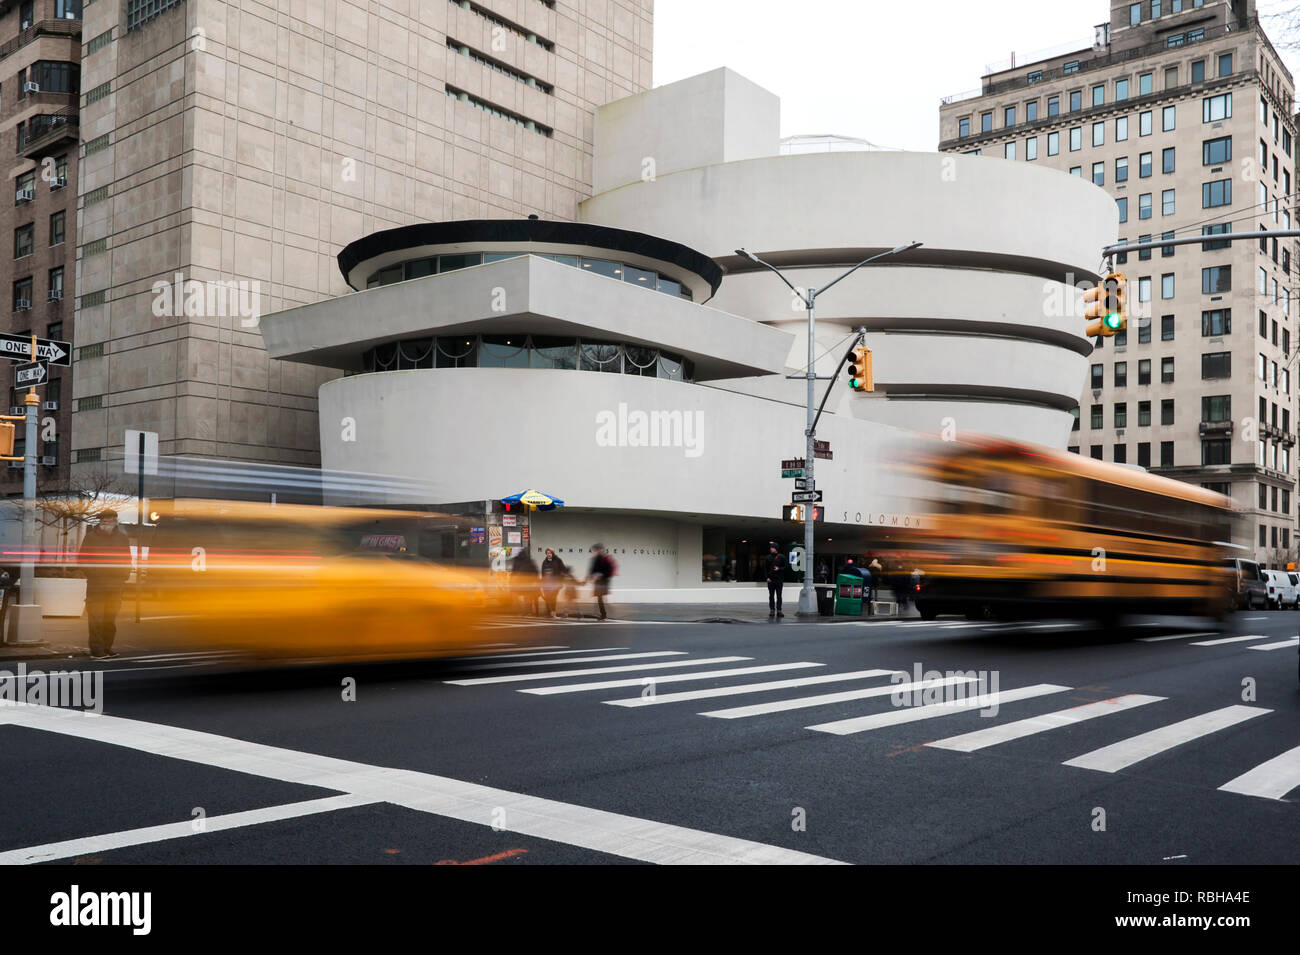 NEW YORK - NOVEMBER 30: The Solomon R. Guggenheim Museum of modern and contemporary art. Designed by Frank Lloyd Wright museum opened on October 21,19 Stock Photo